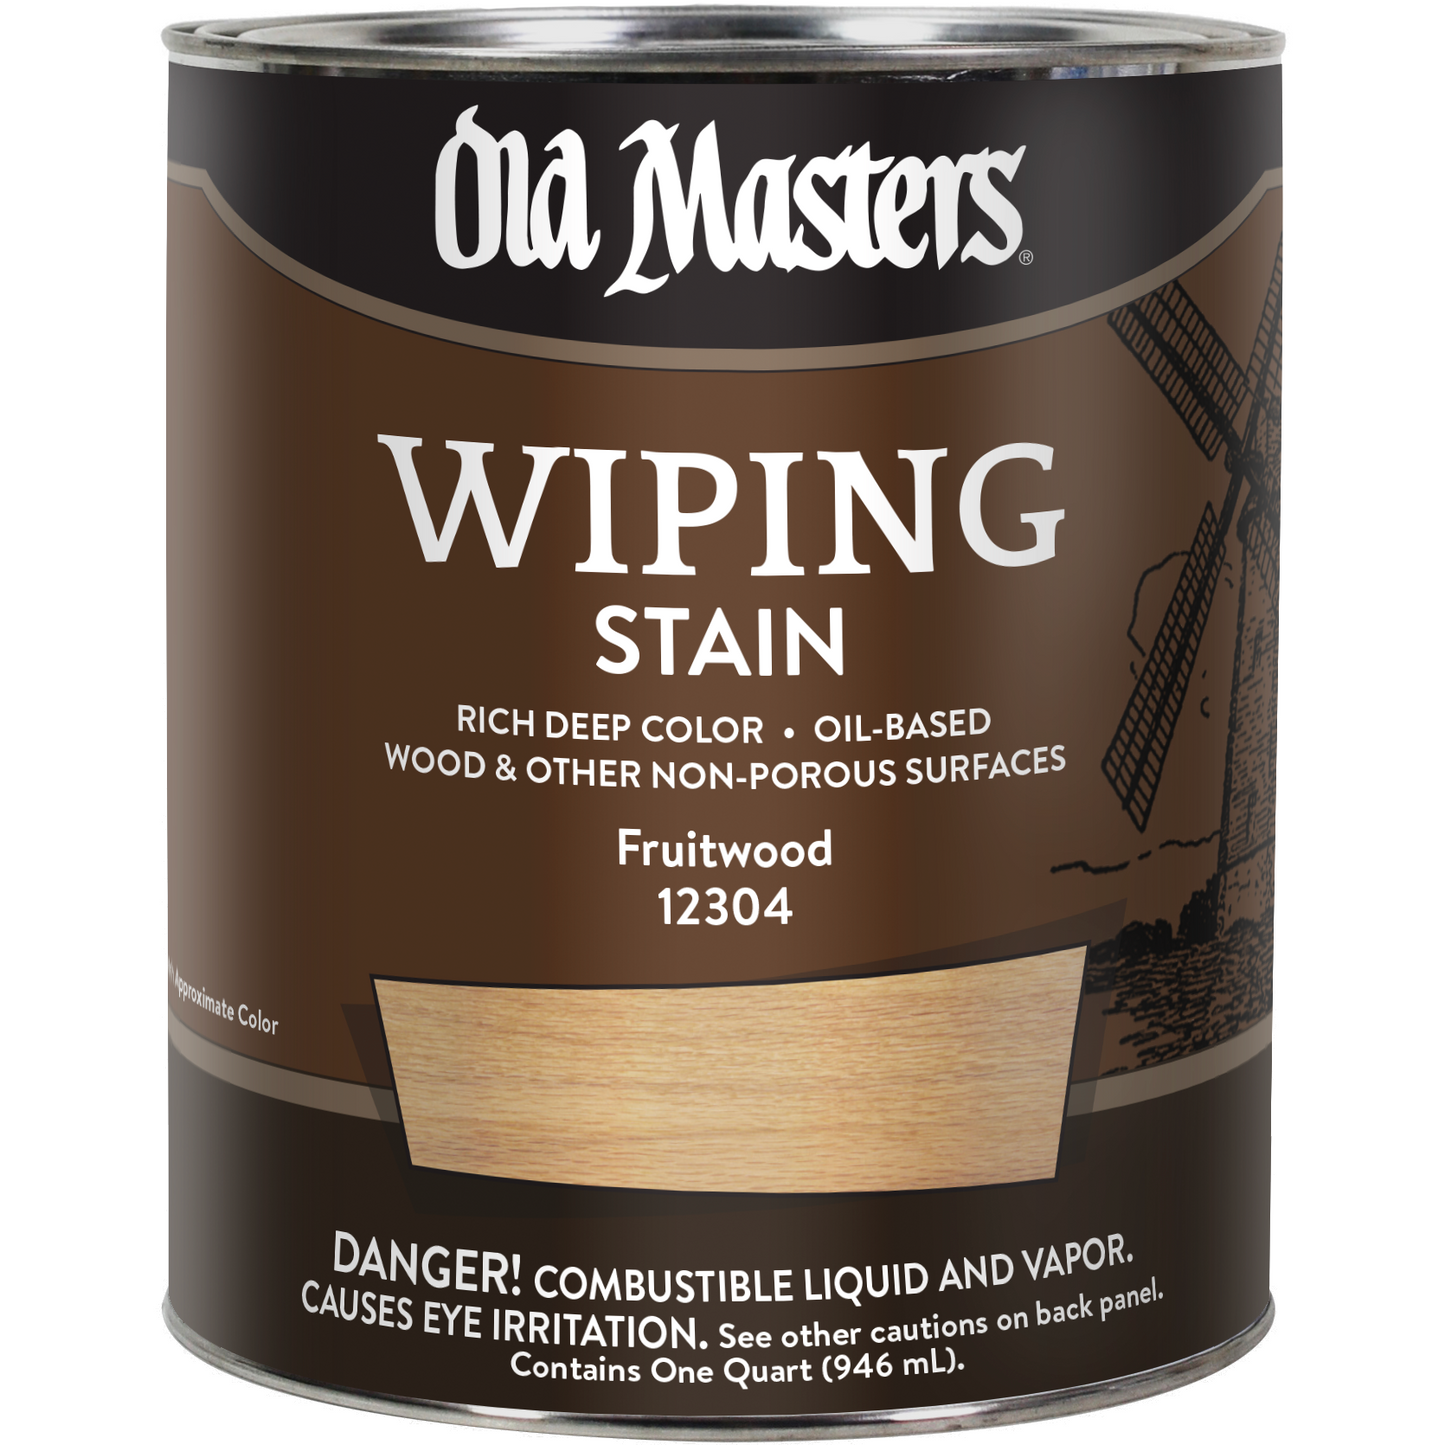 Old Masters Wiping Stain - Fruitwood